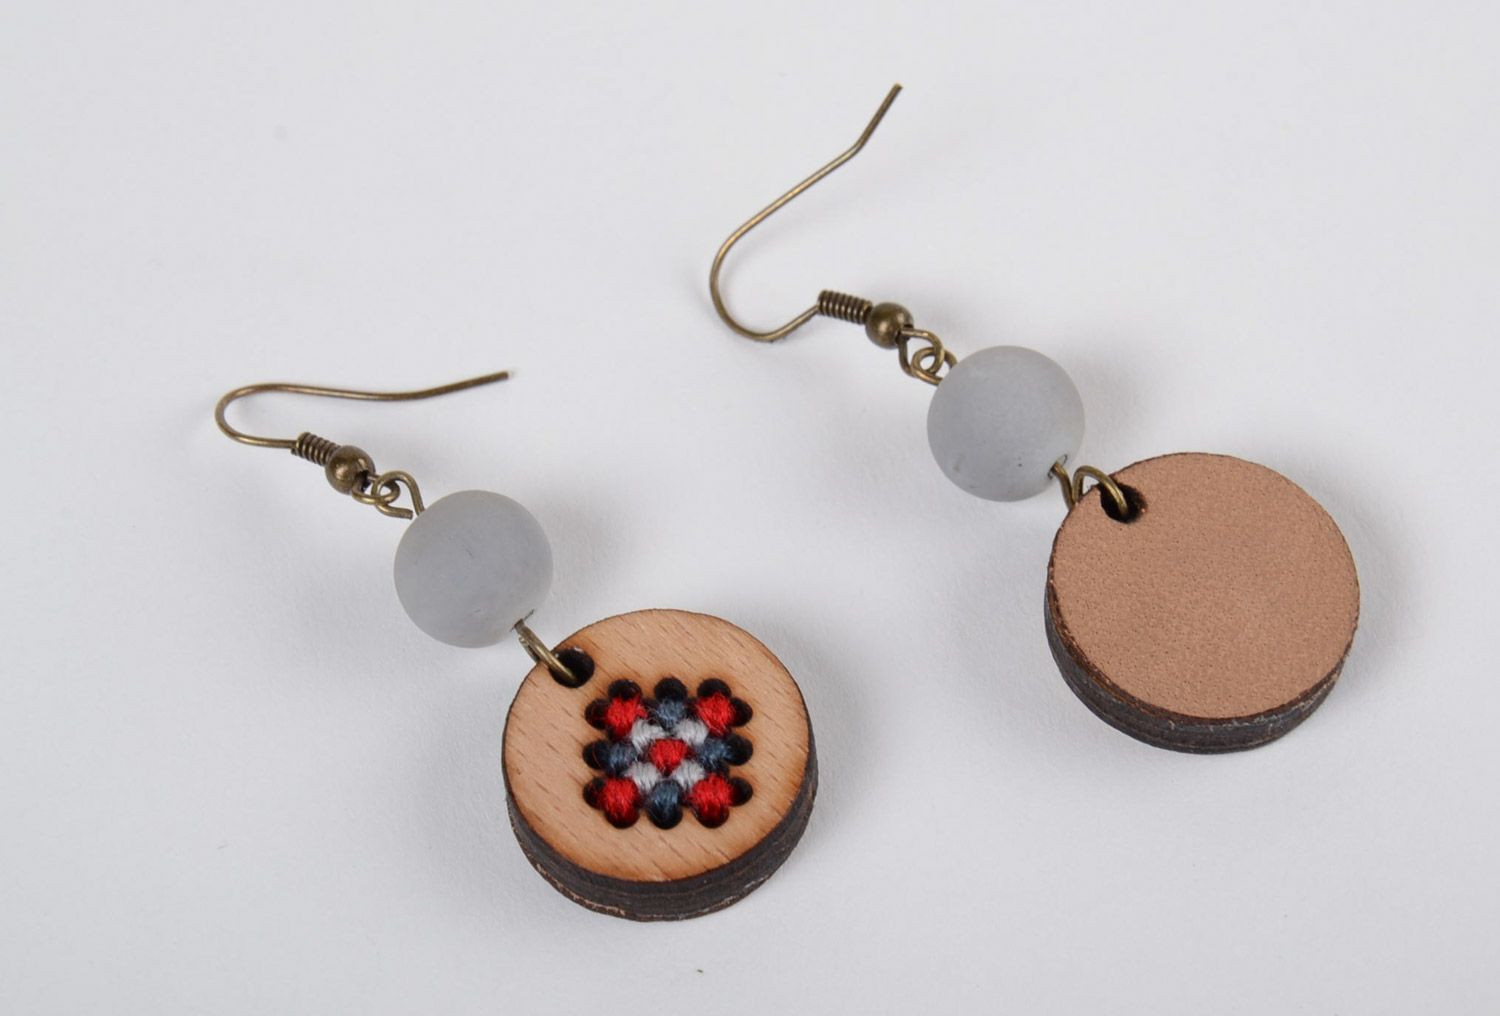 Round wooden earrings with cross stitch embroidery and beads for women photo 4